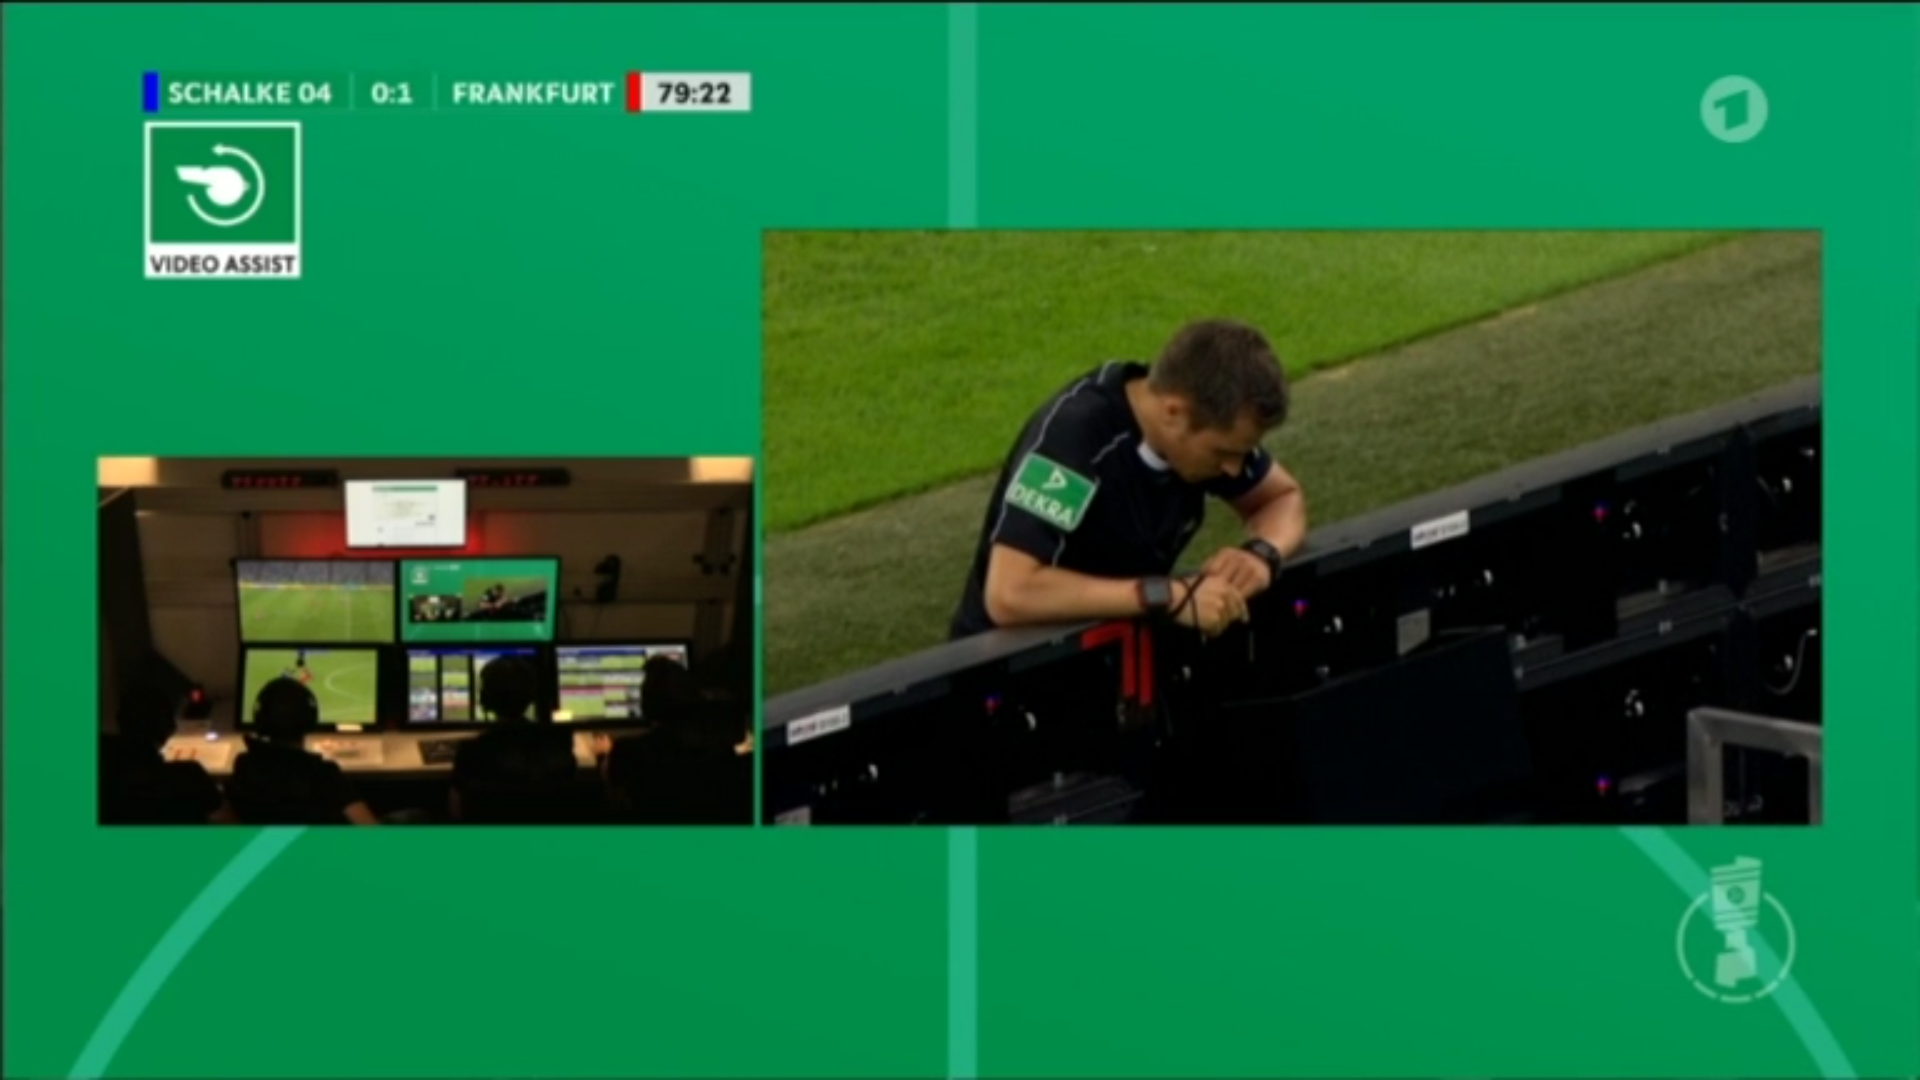 You are currently viewing Mit Videos | Erster Videobeweis im DFB-Pokal